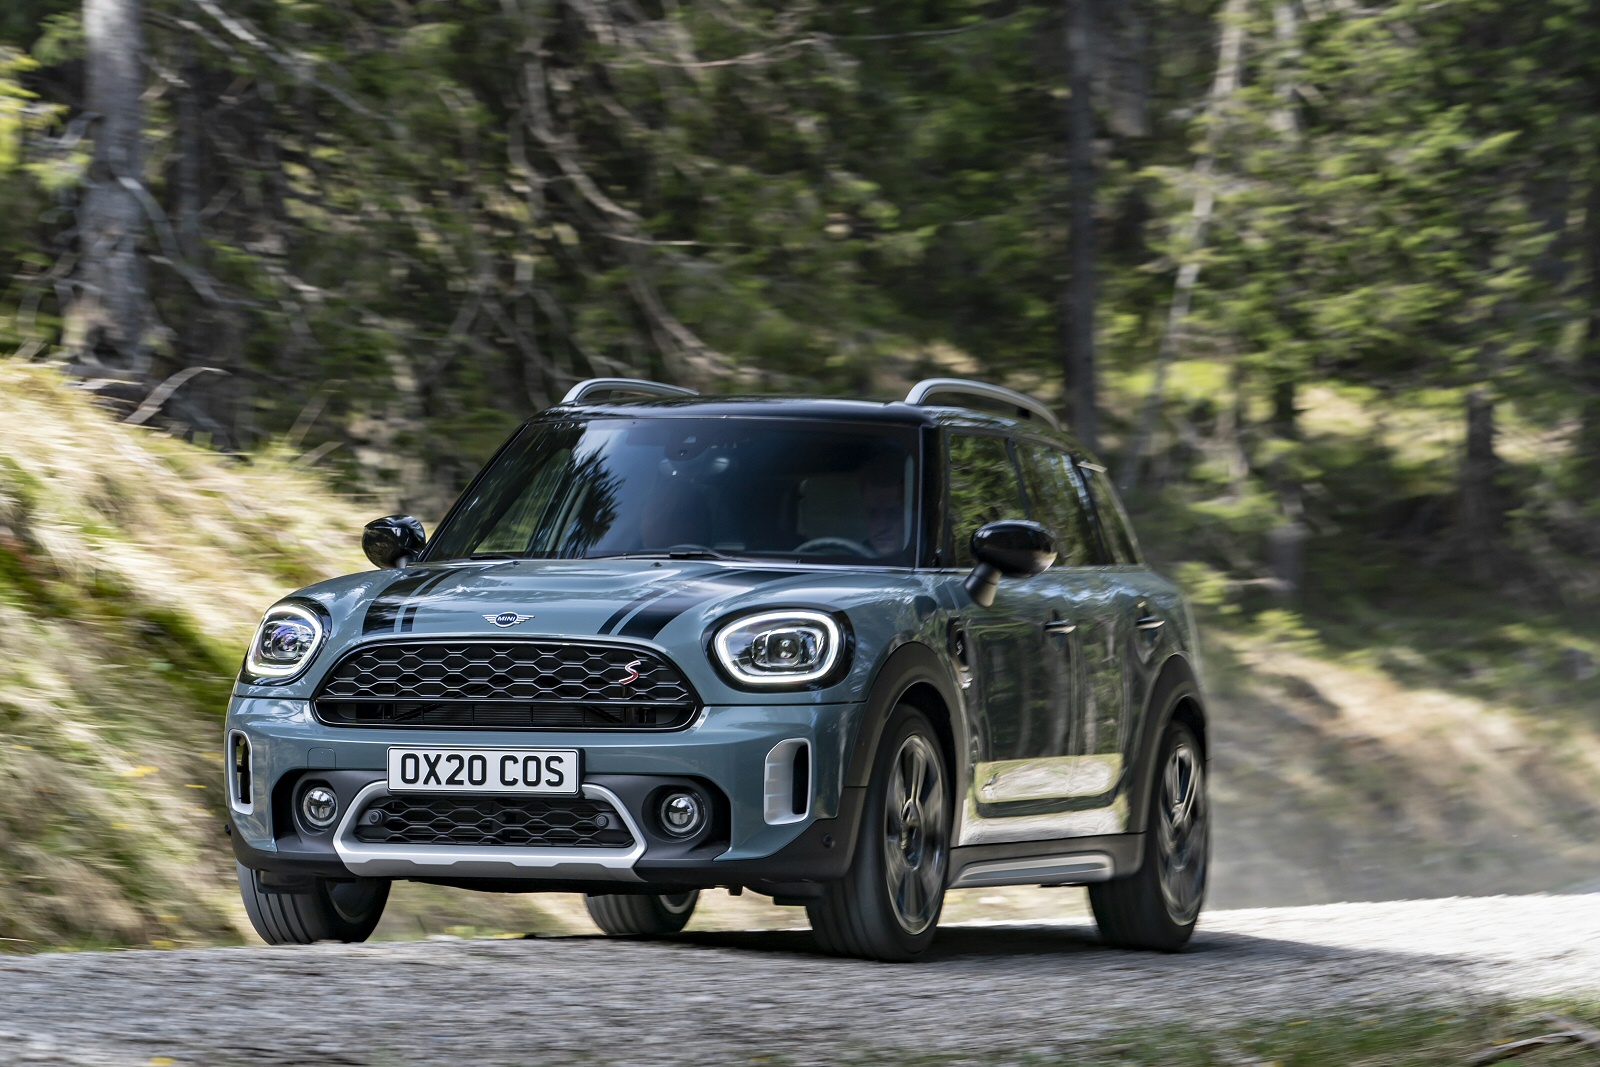 MINI COUNTRYMAN HATCHBACK 2.0 Cooper S Sport ALL4 5dr Auto [Comfort Pack]